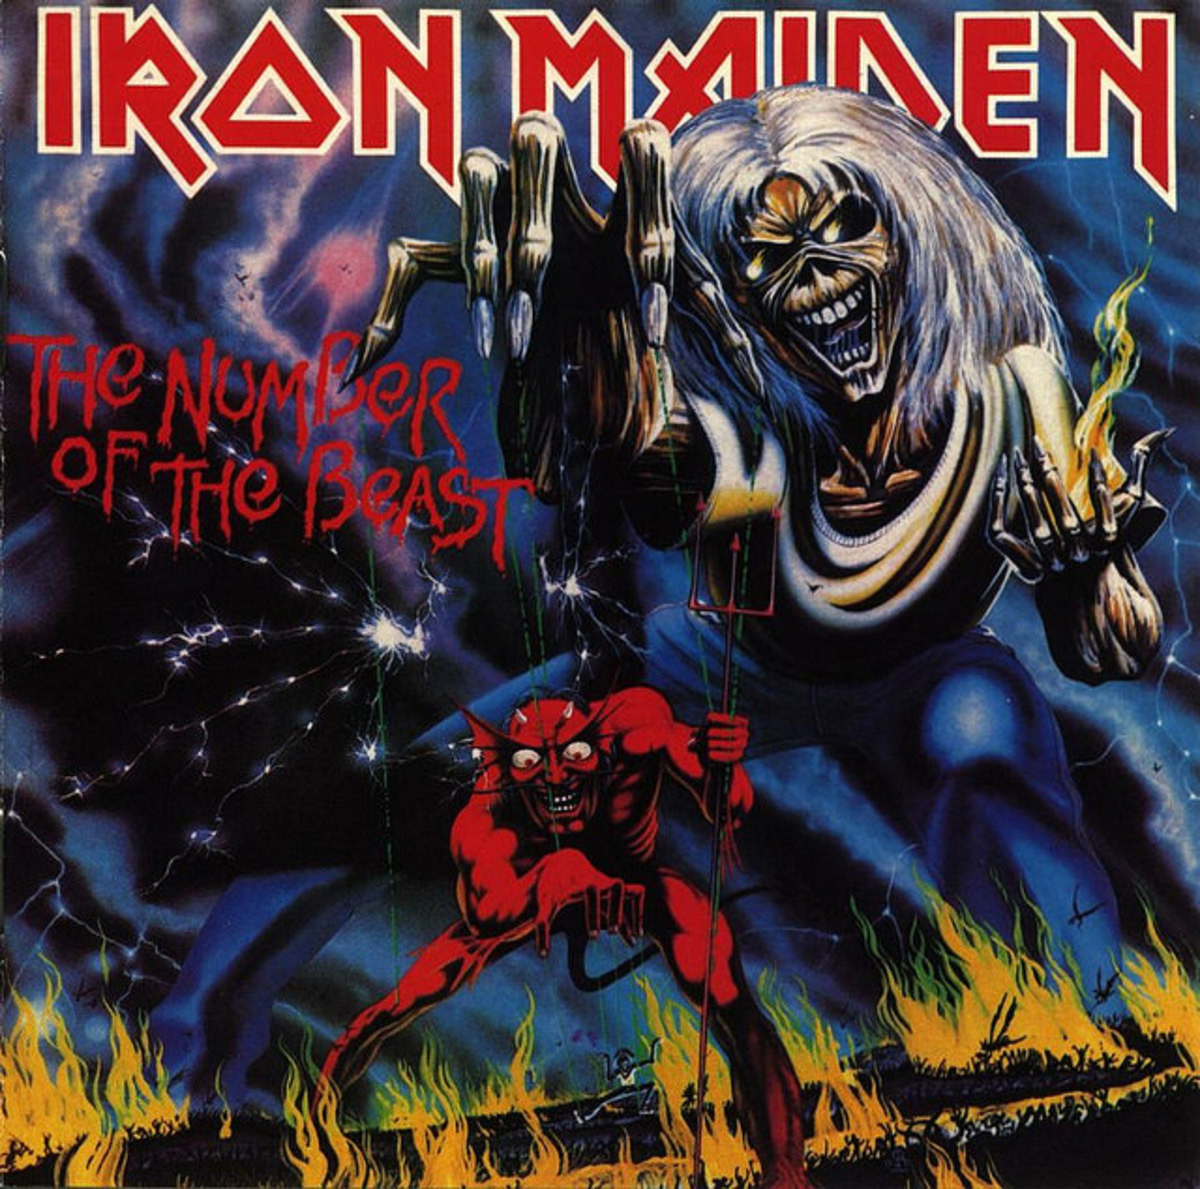 Iron Maiden "The Number of the Beast" Harvest ST-12202 12" LP Vinyl Record U.S. Pressing (1982) Album Cover Art by Derek Riggs